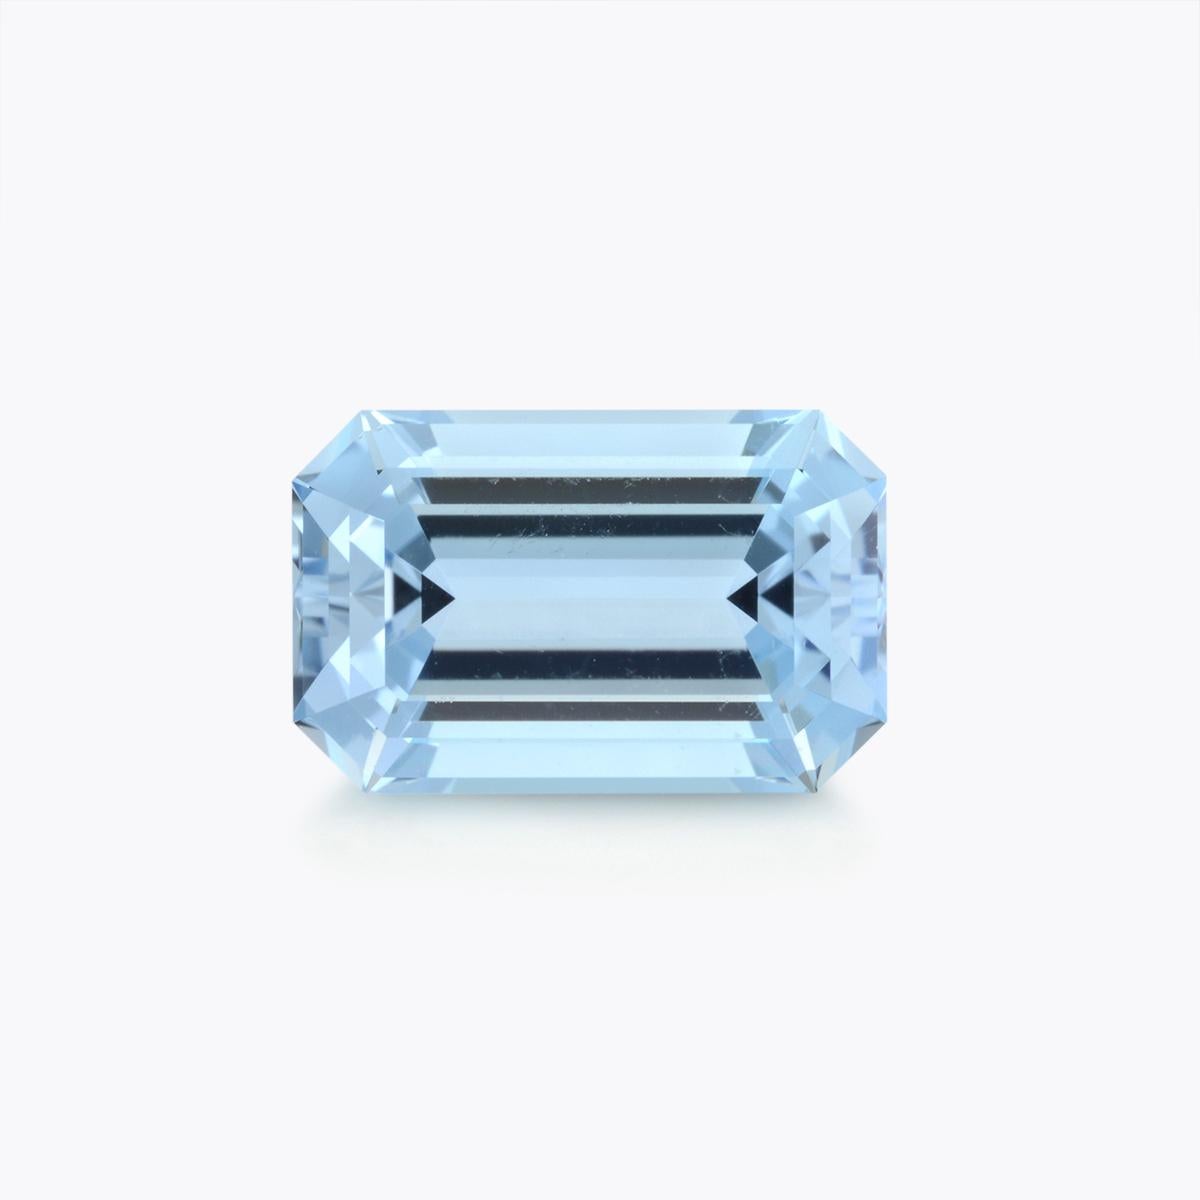 Marvelous 2.73 carat Aquamarine emerald-cut loose gem, offered unmounted to someone special.
Returns are accepted and paid by us within 7 days of delivery.
We offer supreme custom jewelry work upon request. Please contact us for more details.
For